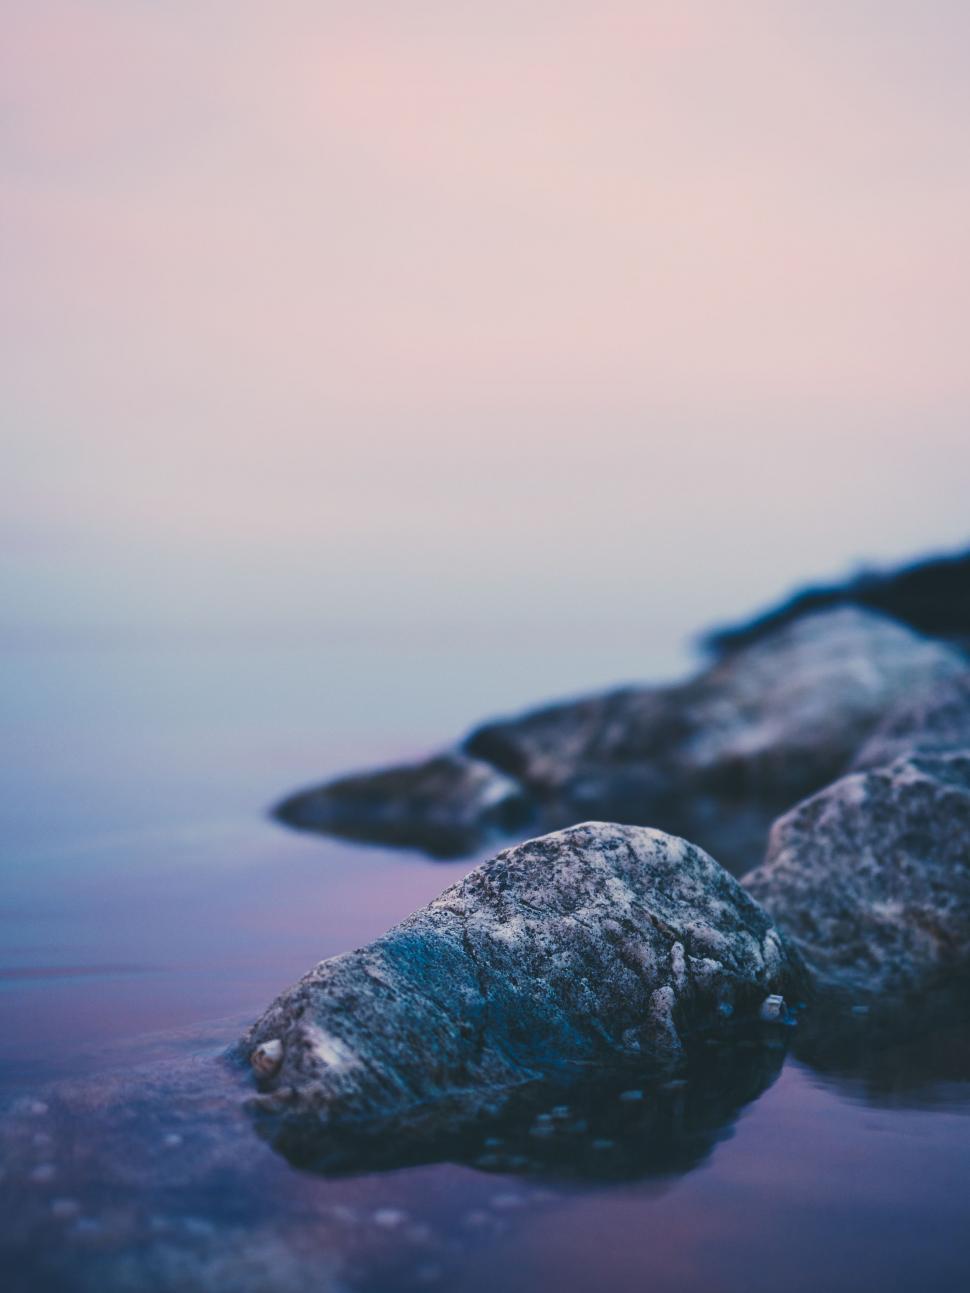 Free Image of Blurry Photo of Rocks, Water, and Building 